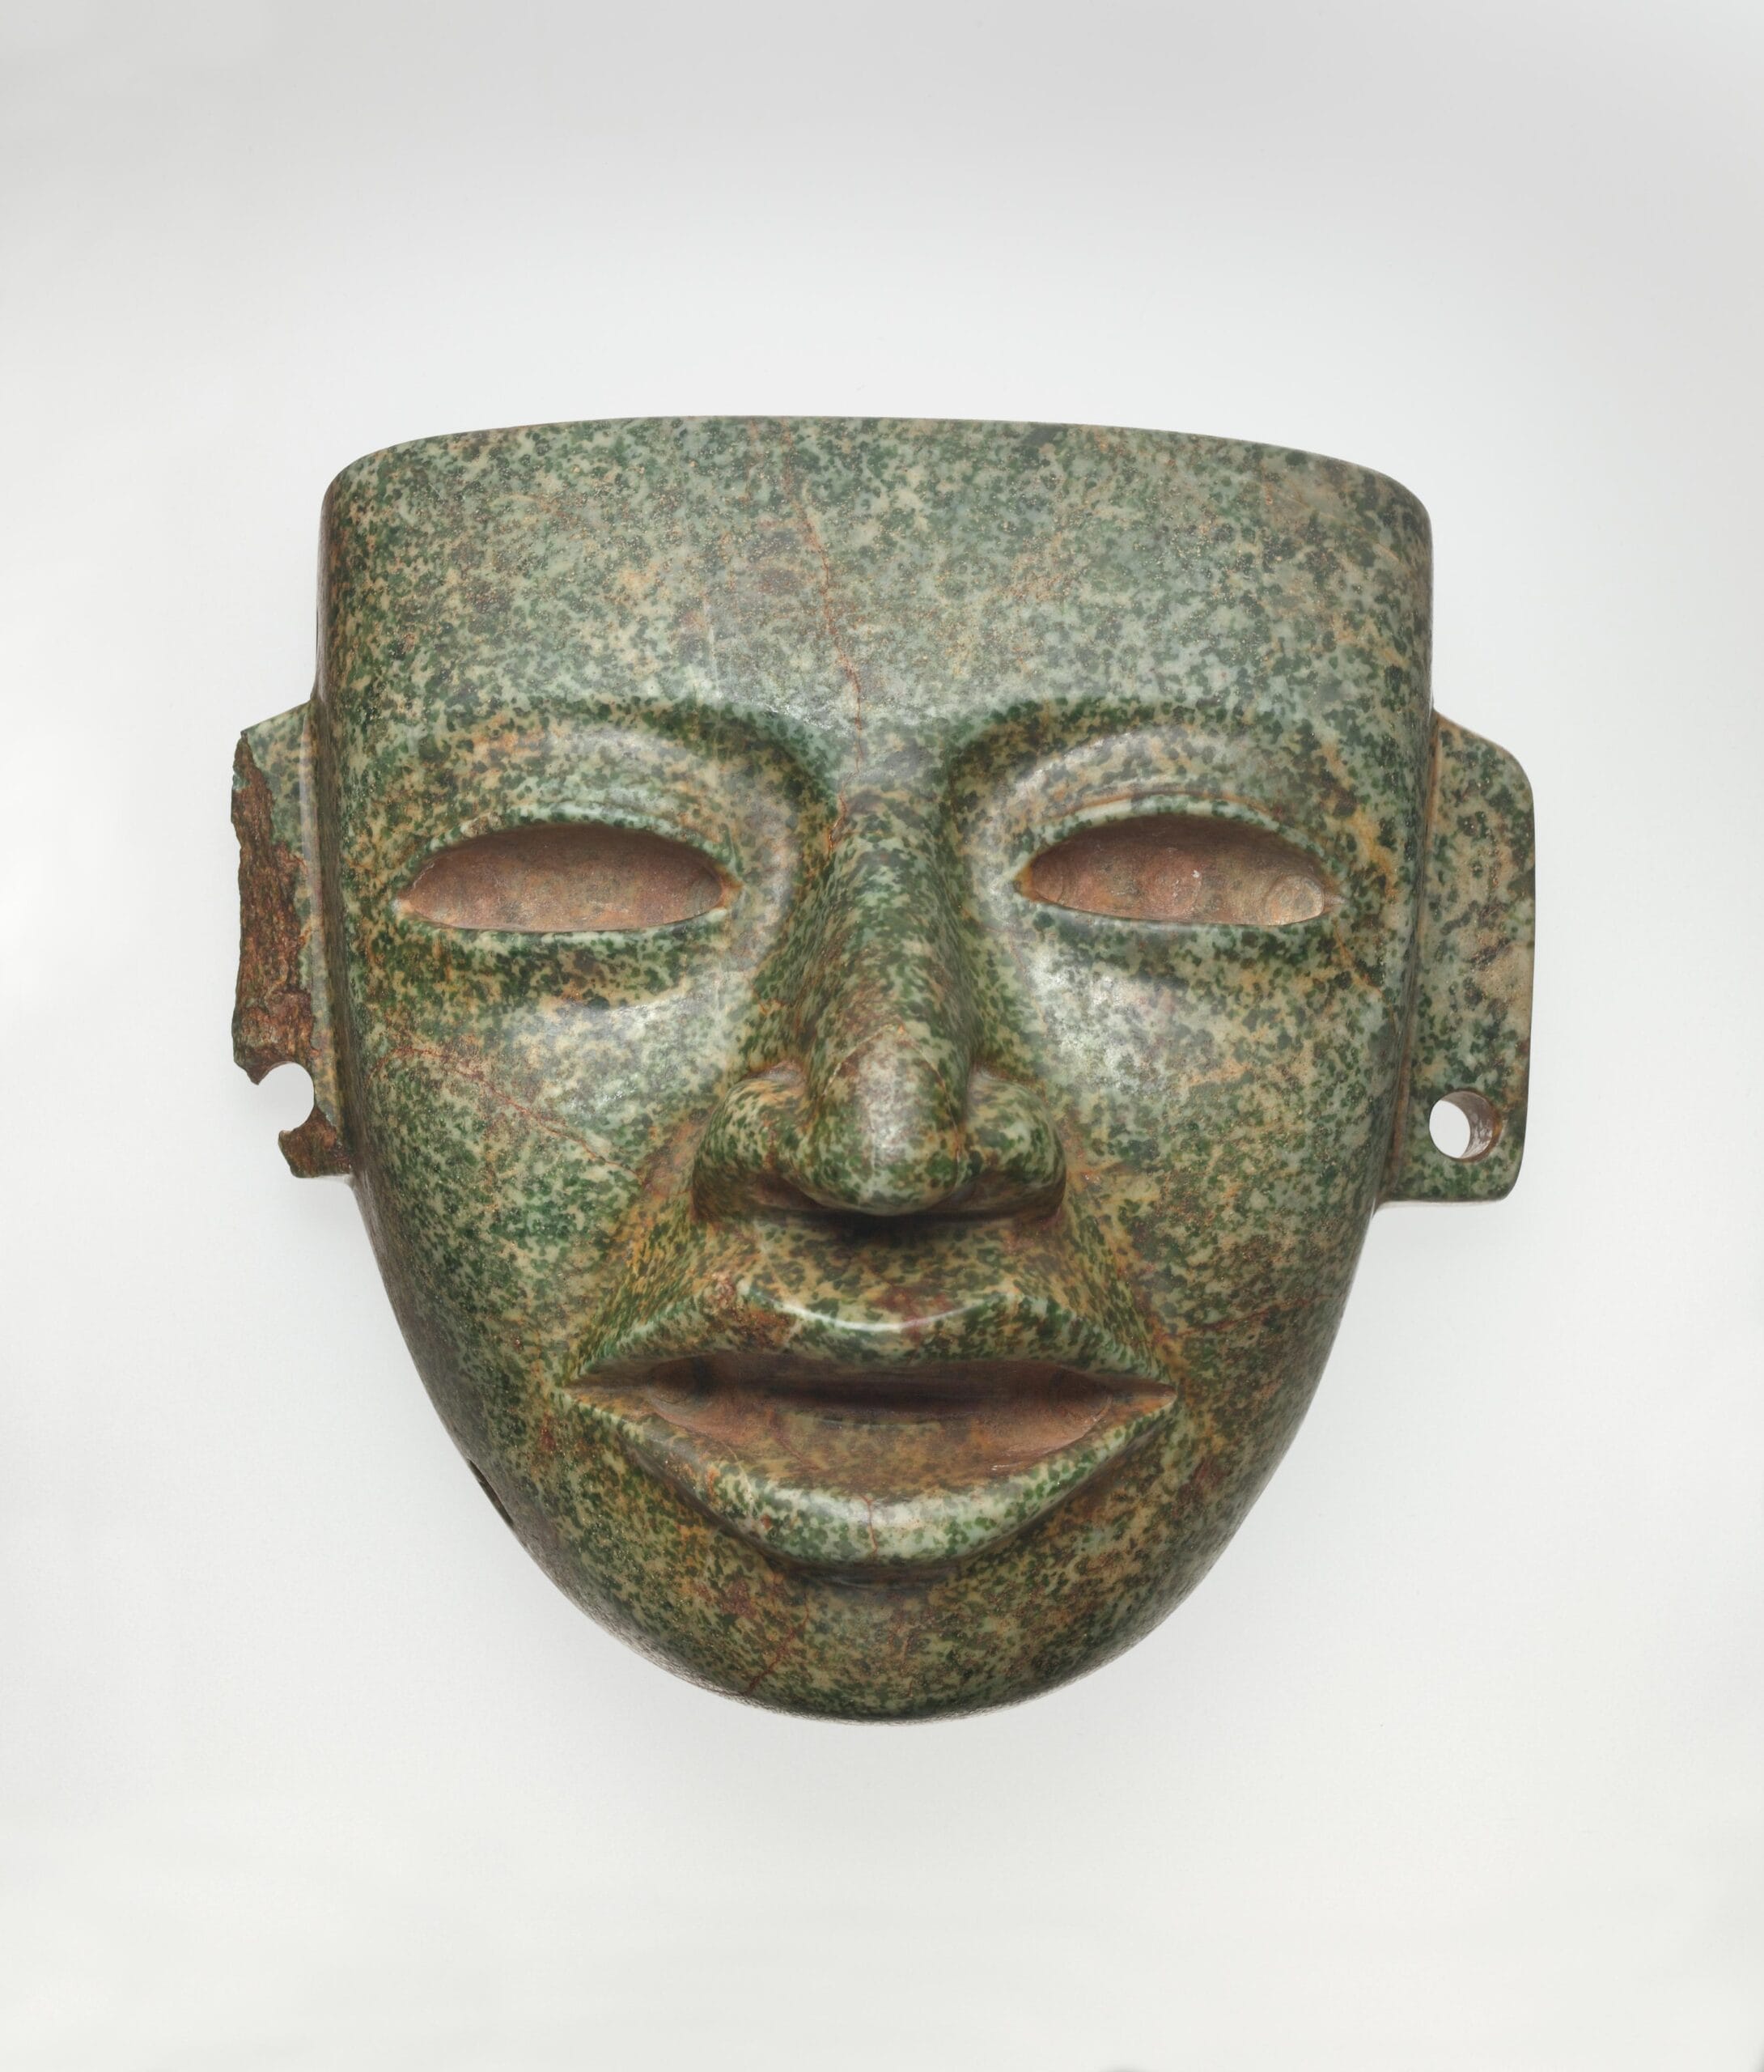 Mottled green stone face mask with open mouth, hollowed eyes, and pierced ears.